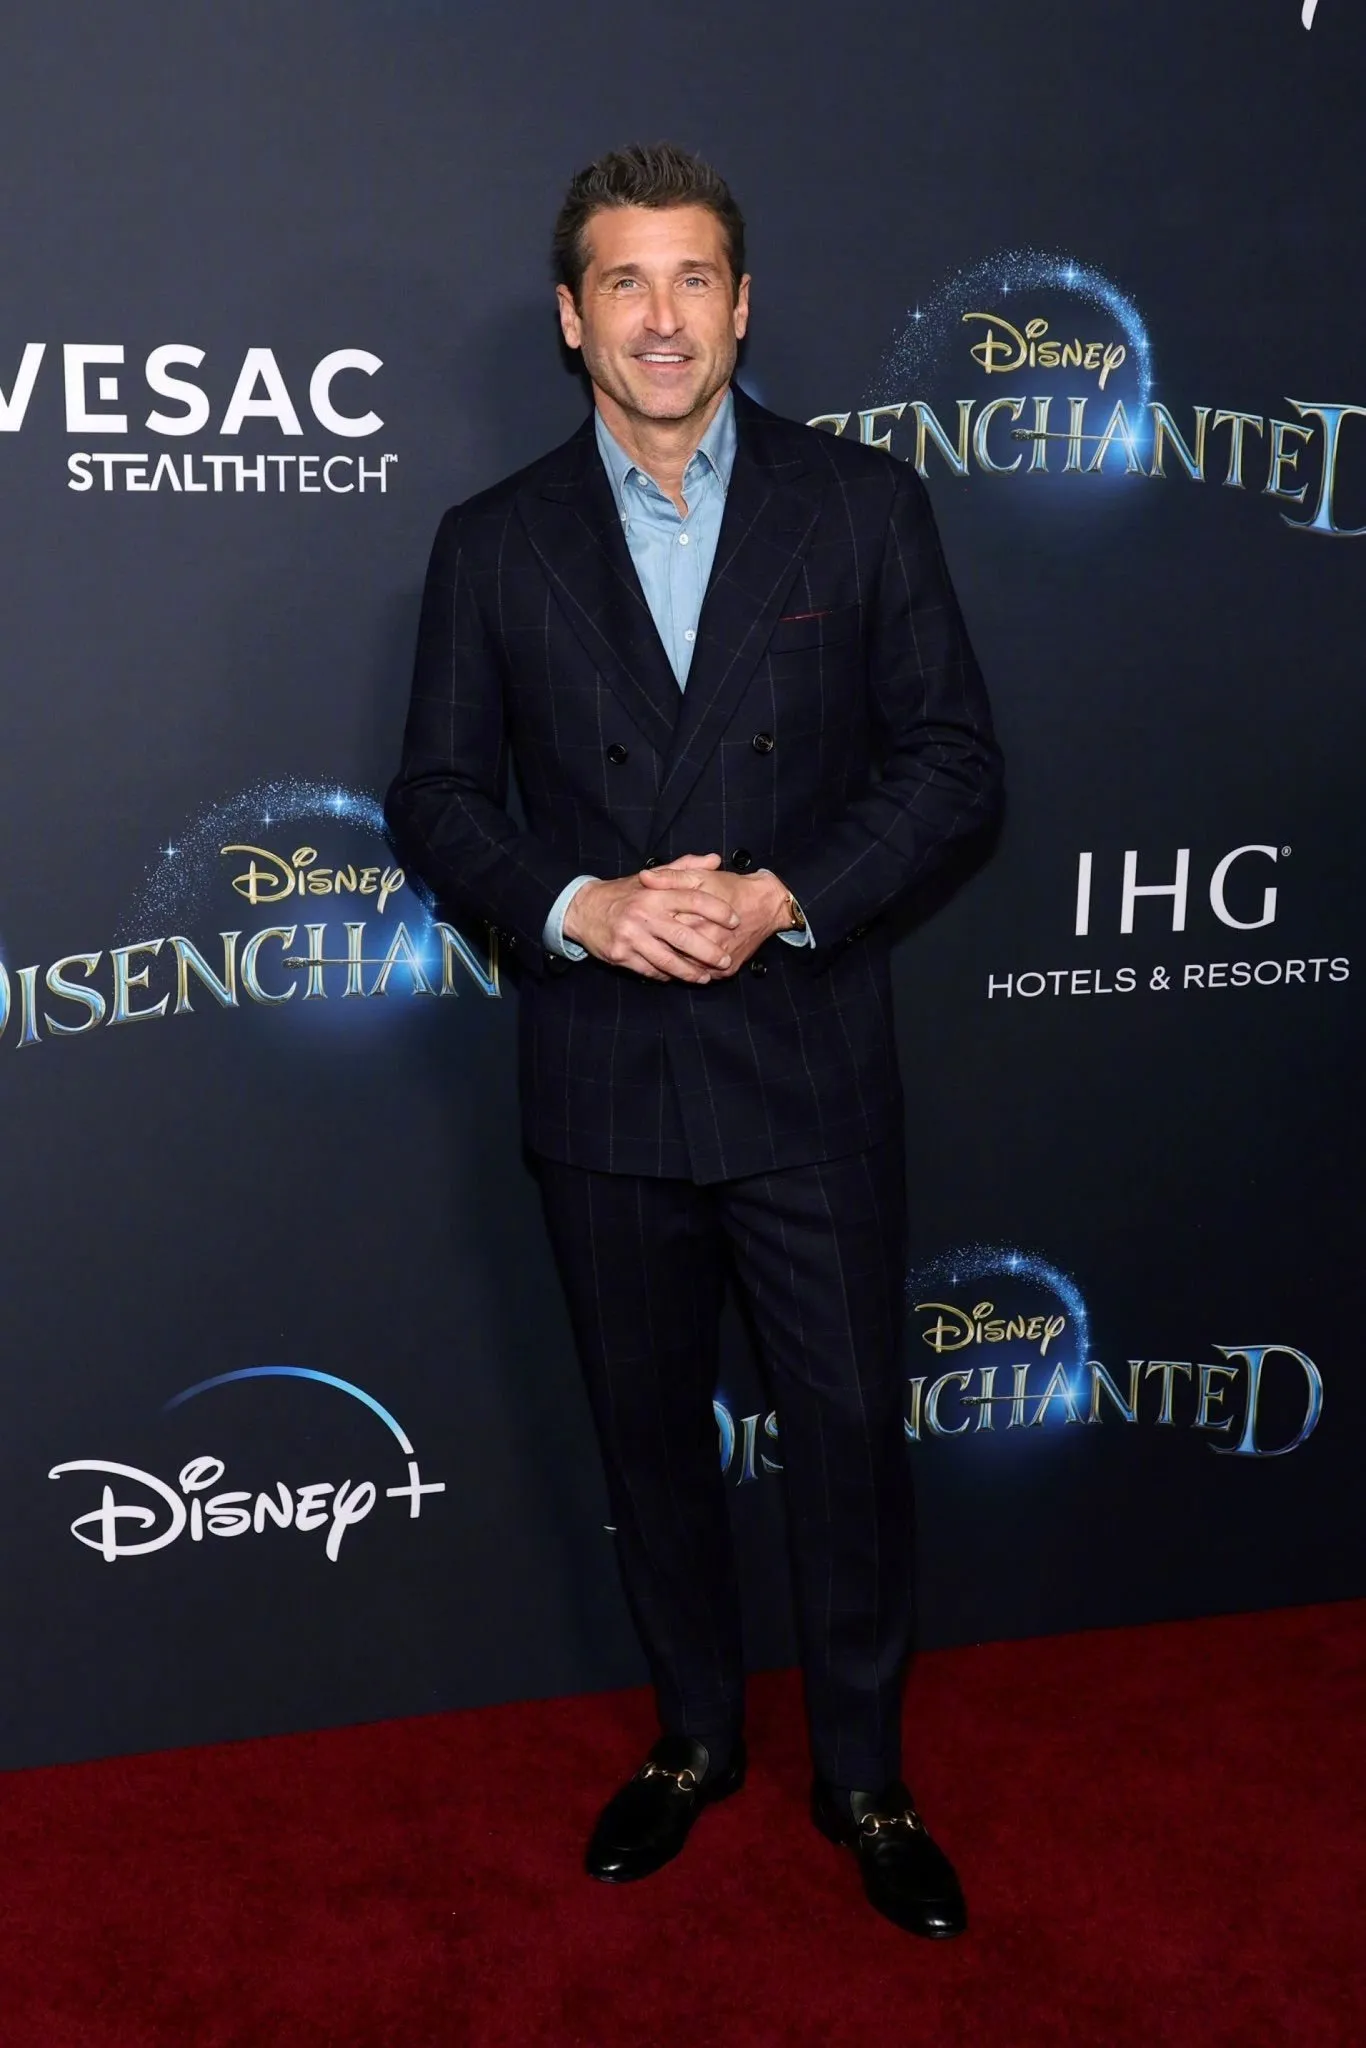 'Disenchanted' crew attend the premiere in Los Angeles ​​​ | FMV6